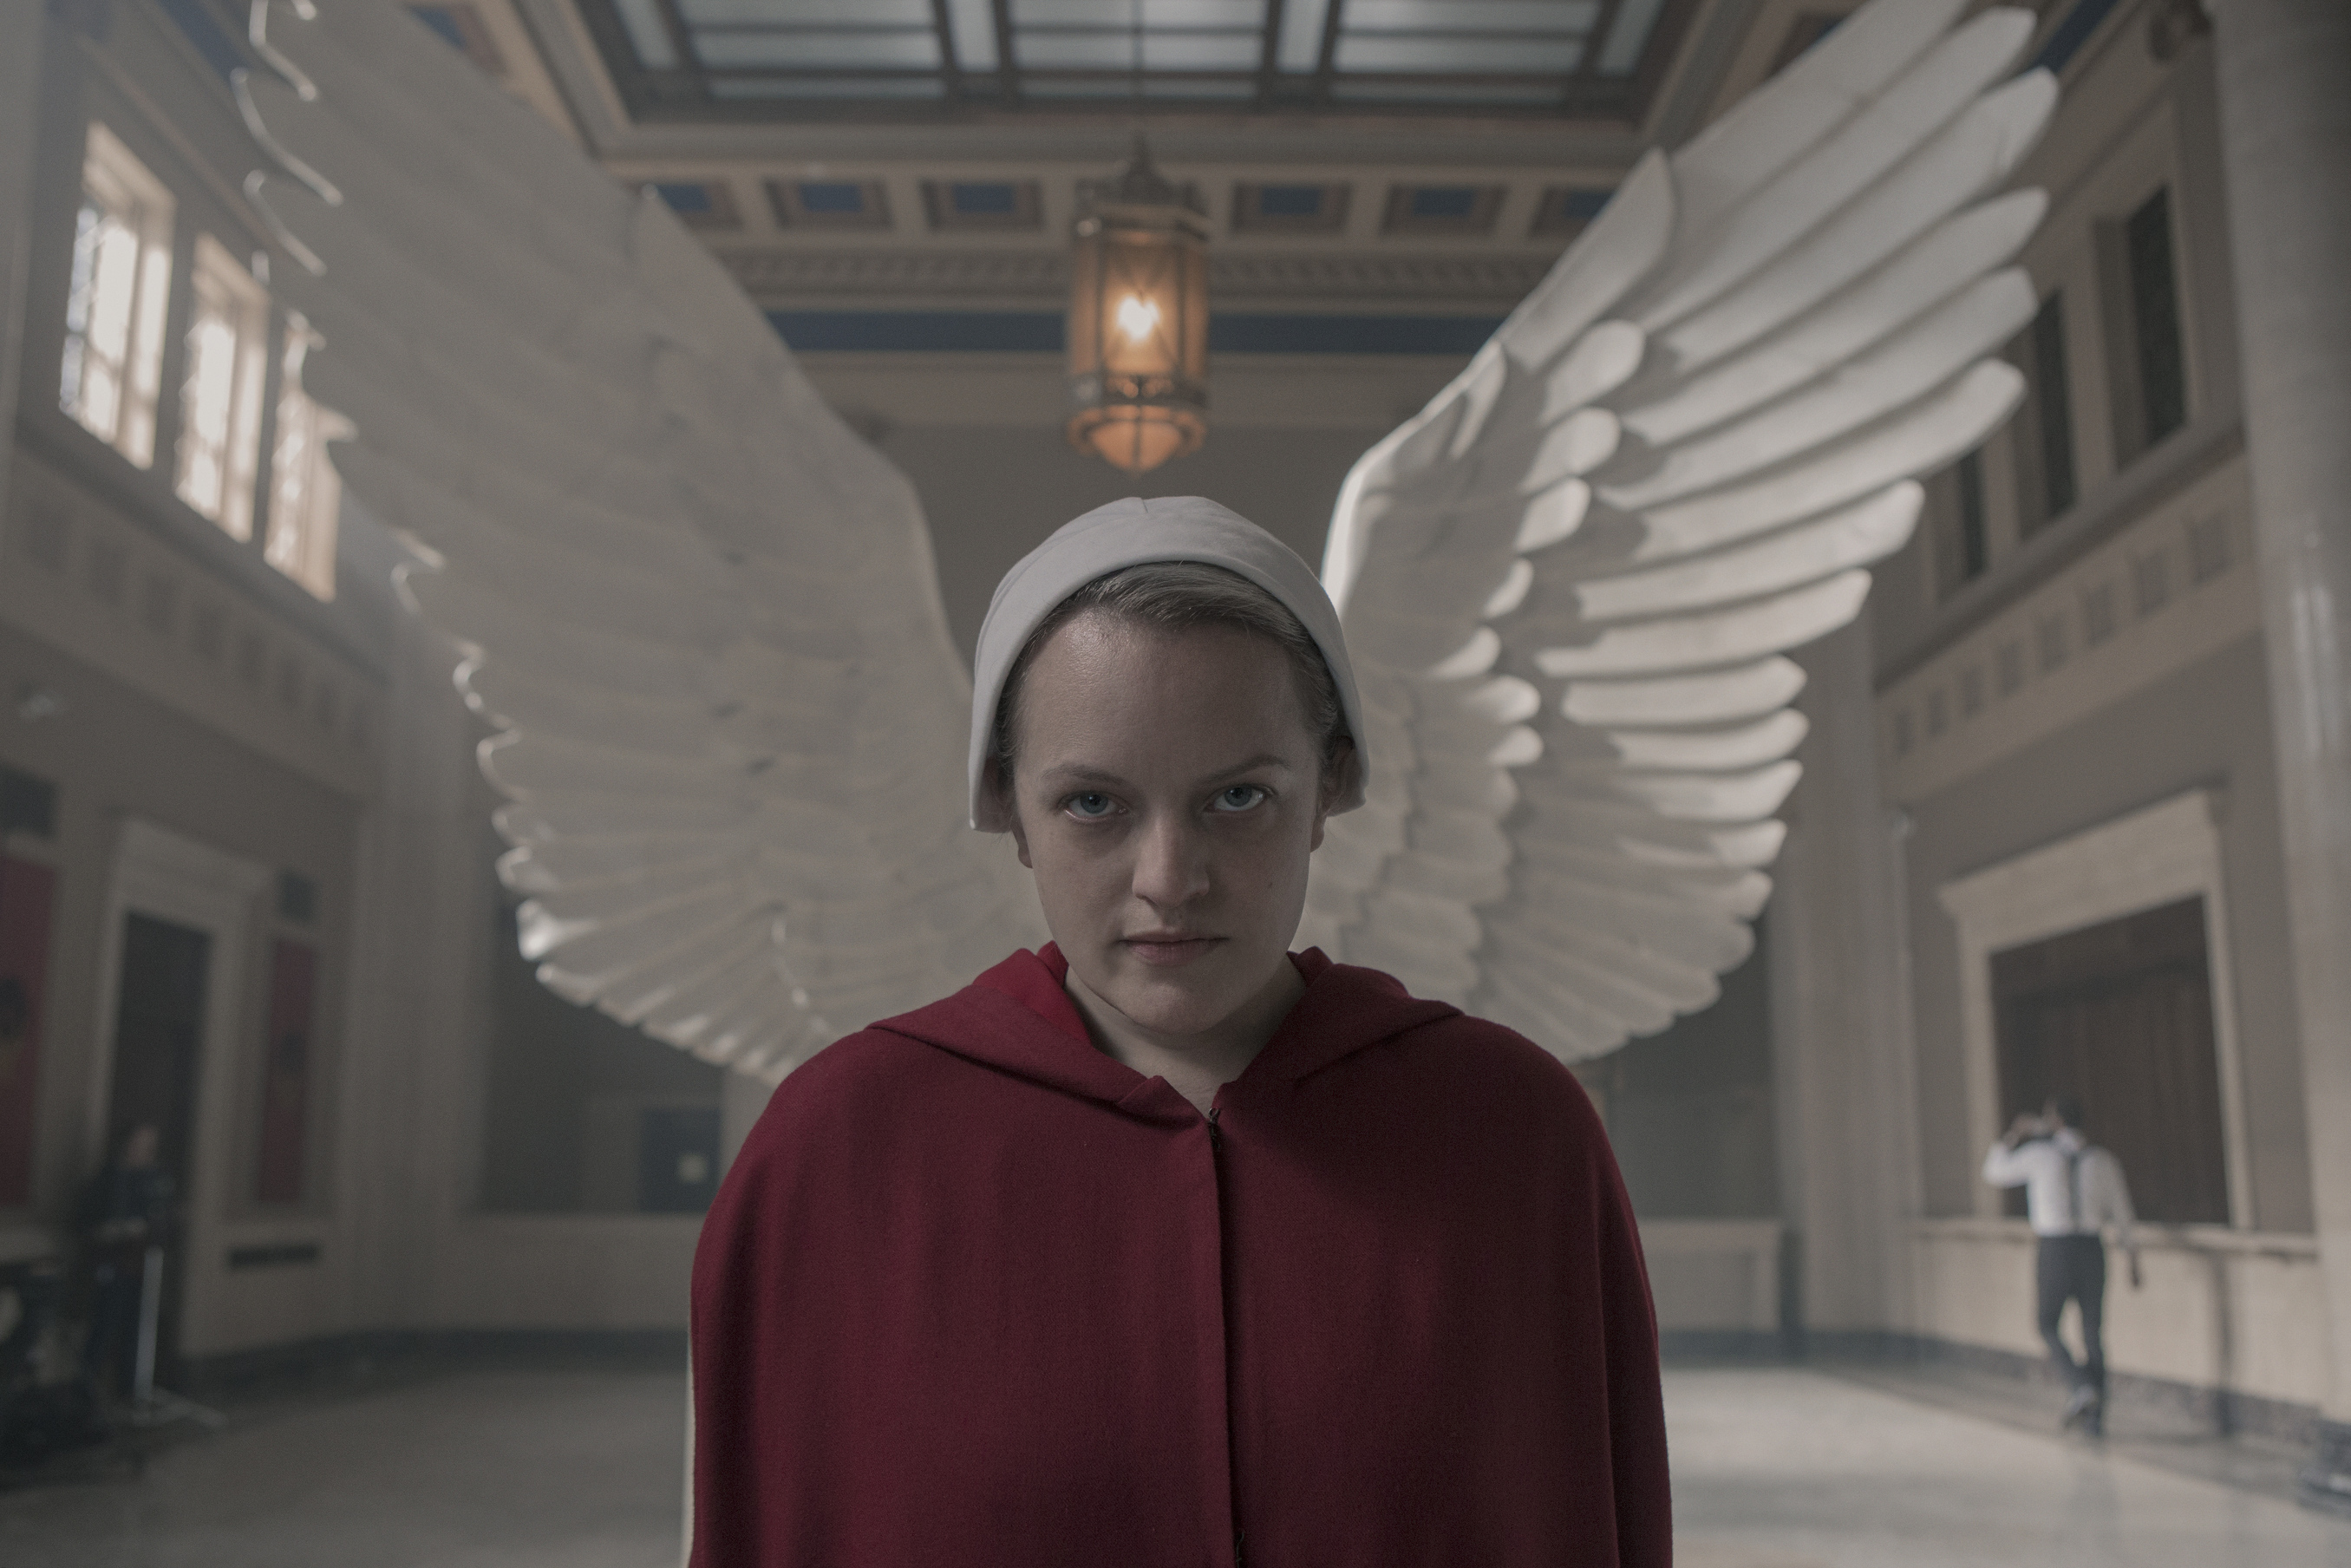 The Handmaid's Tale -- "Household" - Episode 306 -- June accompanies the Waterfords to Washington D.C., where a powerful family offers a glimpse of the future of Gilead. June makes an important connection as she attempts to protect Nichole. June (Elisabeth Moss), shown. (Sophie Giraud—Hulu)